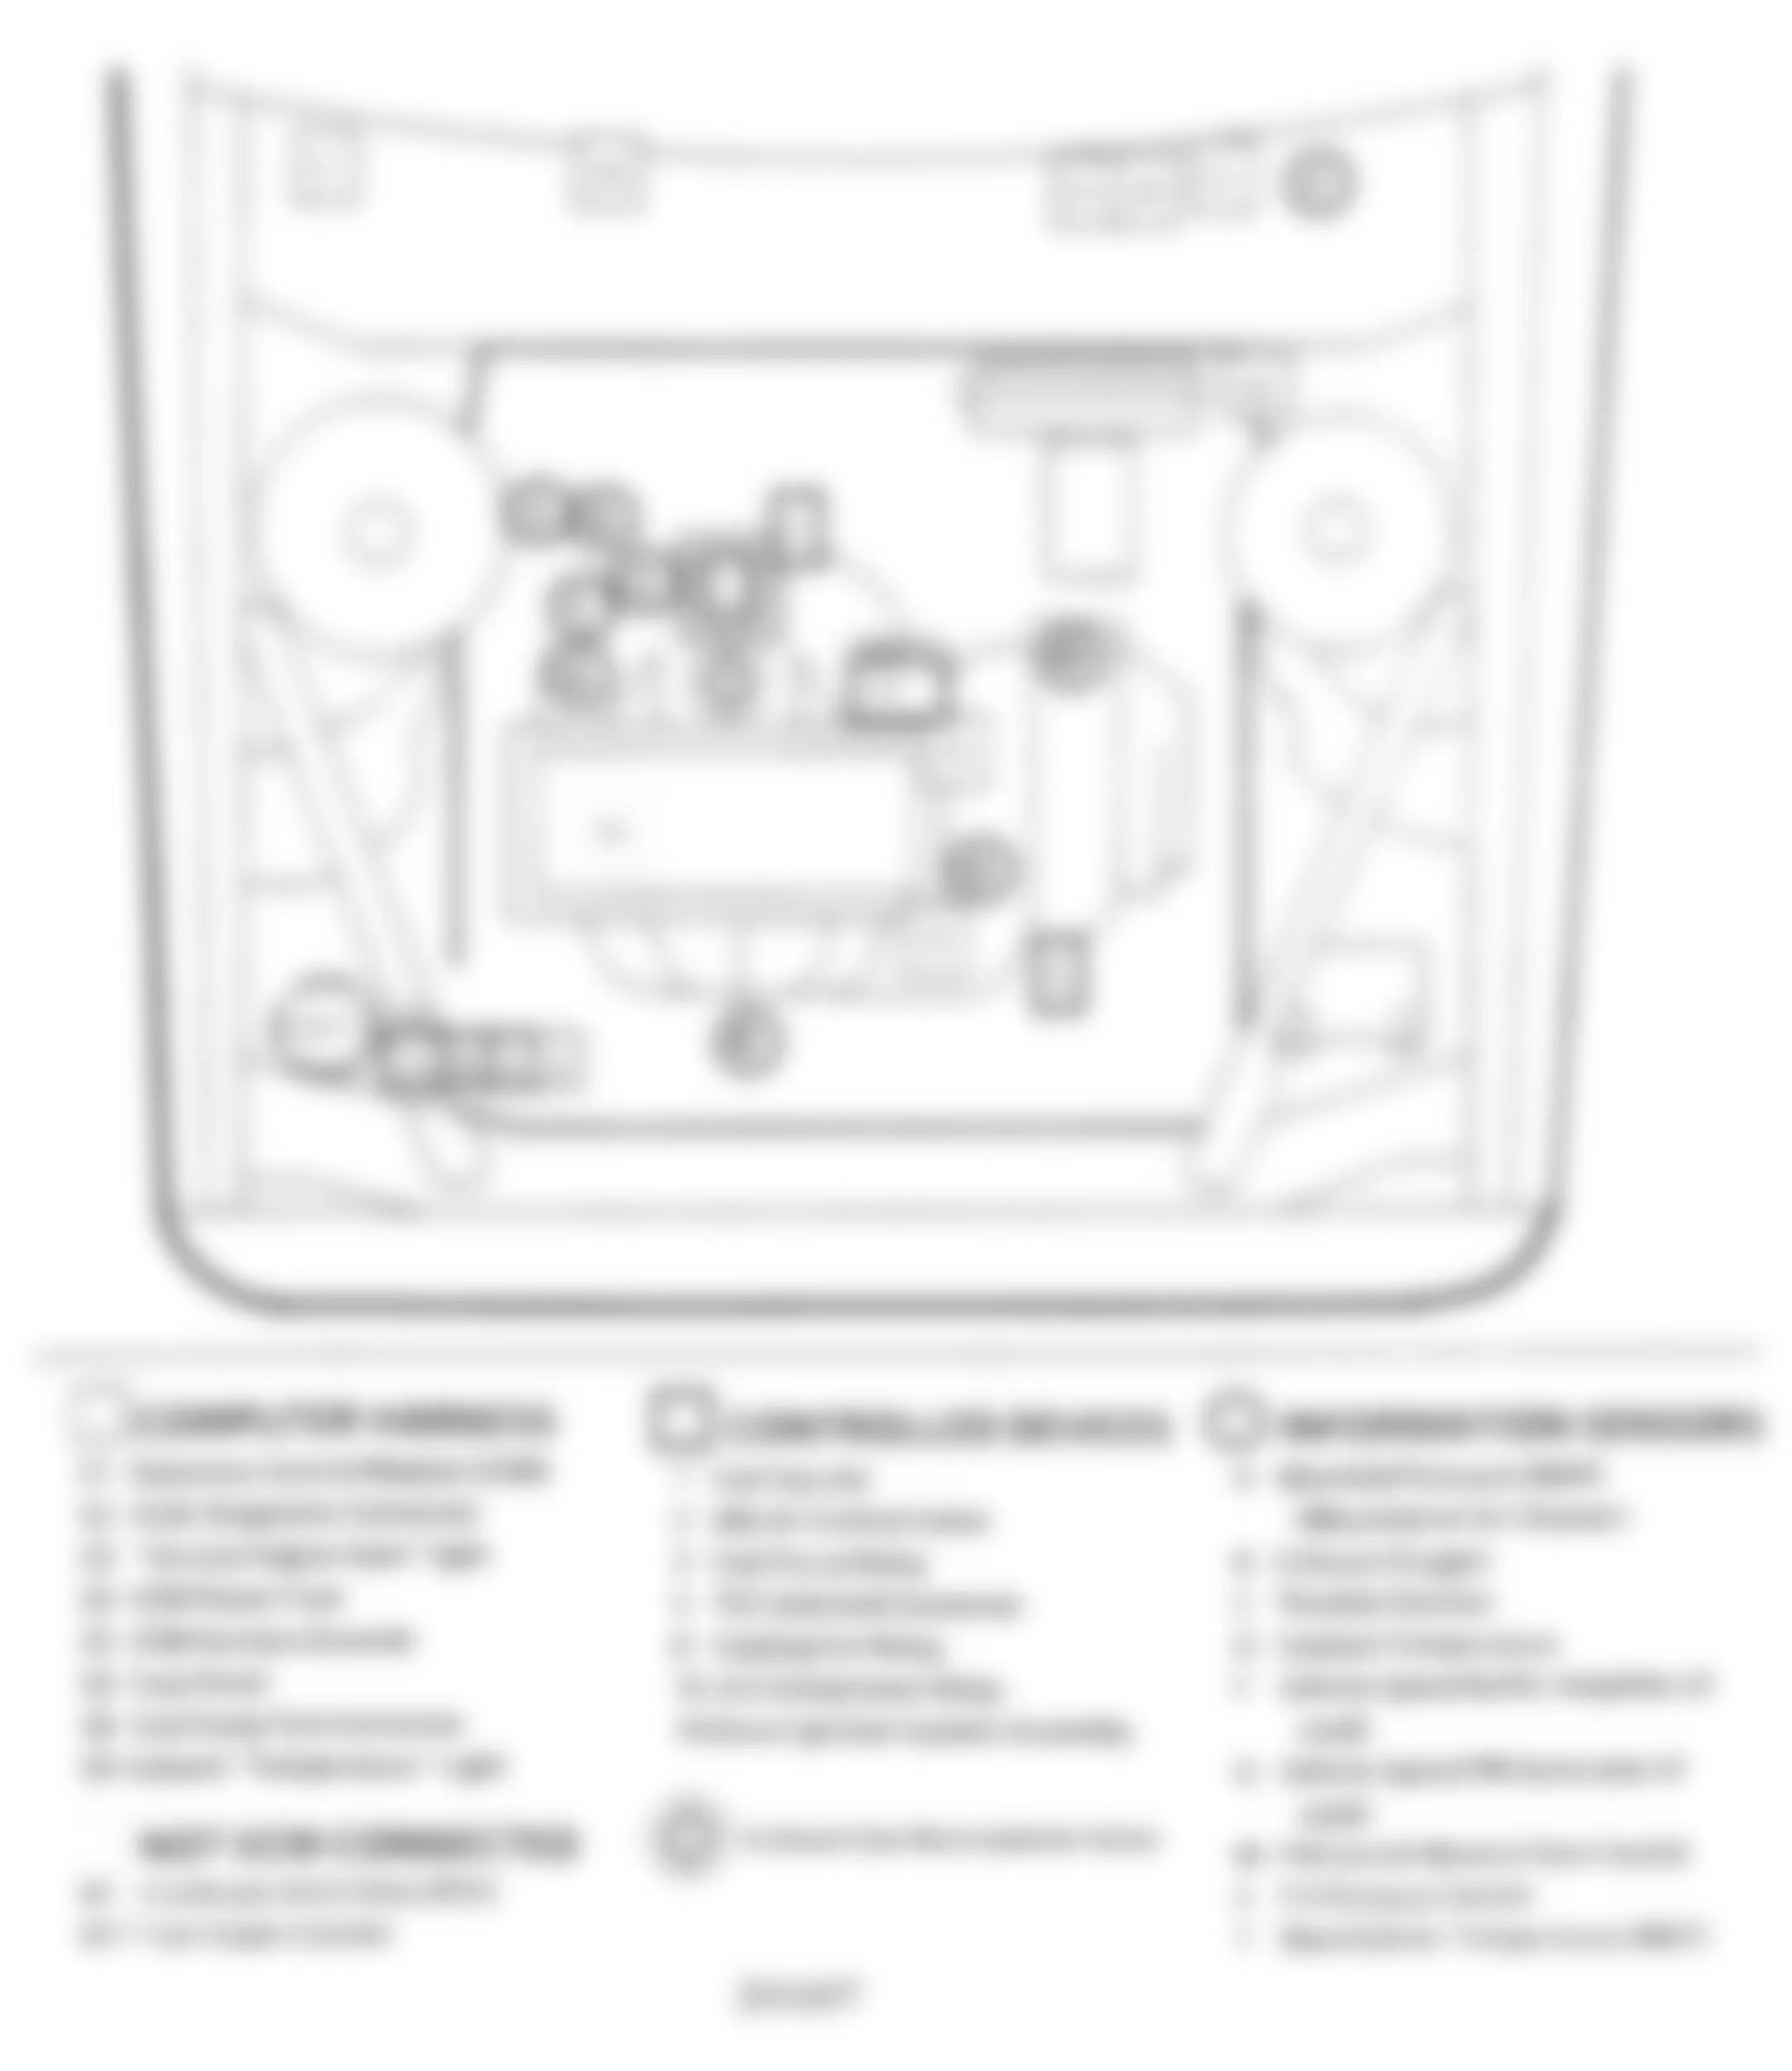 Buick Skylark Luxury 1990 - Component Locations -  Component Locations (4 Of 6)